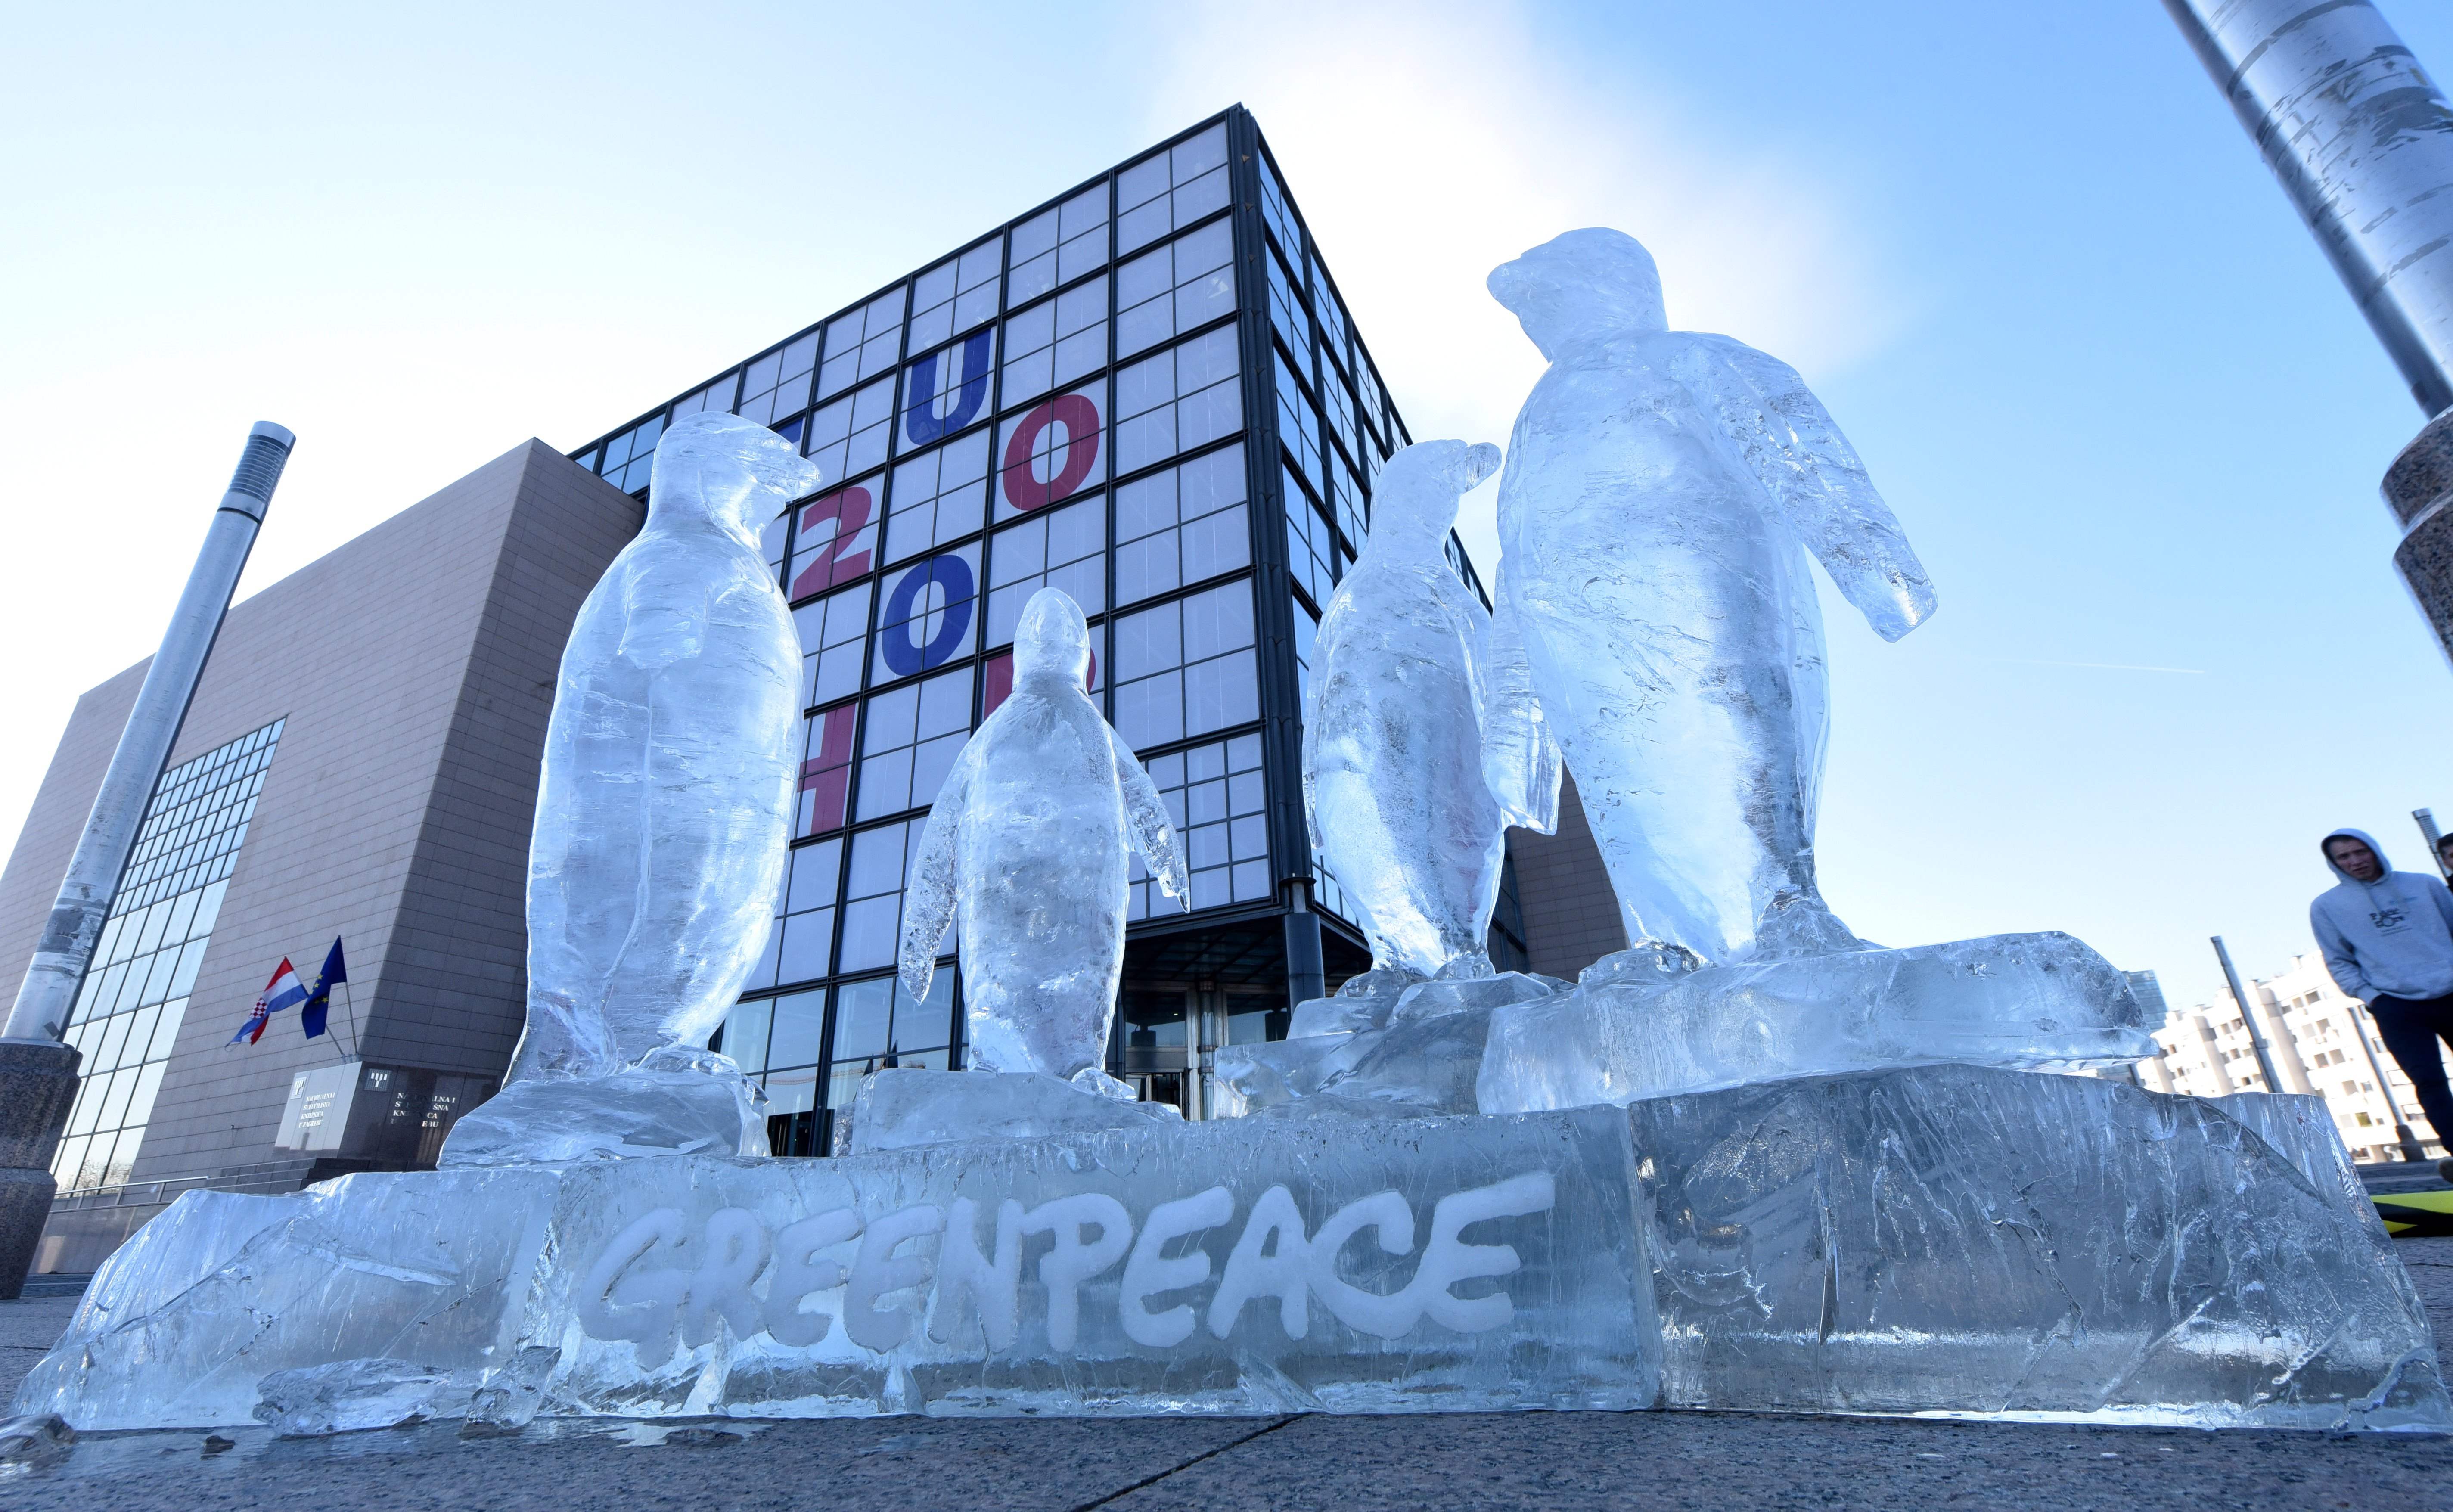 An ice sculpture depicting penguins has been installed by Greepeance activists outside the national and university library, the seat of Croatia's EU rotating presidency, as part of an international campaign to protect oceans, in Zagreb, on February 7, 2020. (Photo by Denis LOVROVIC / AFP)